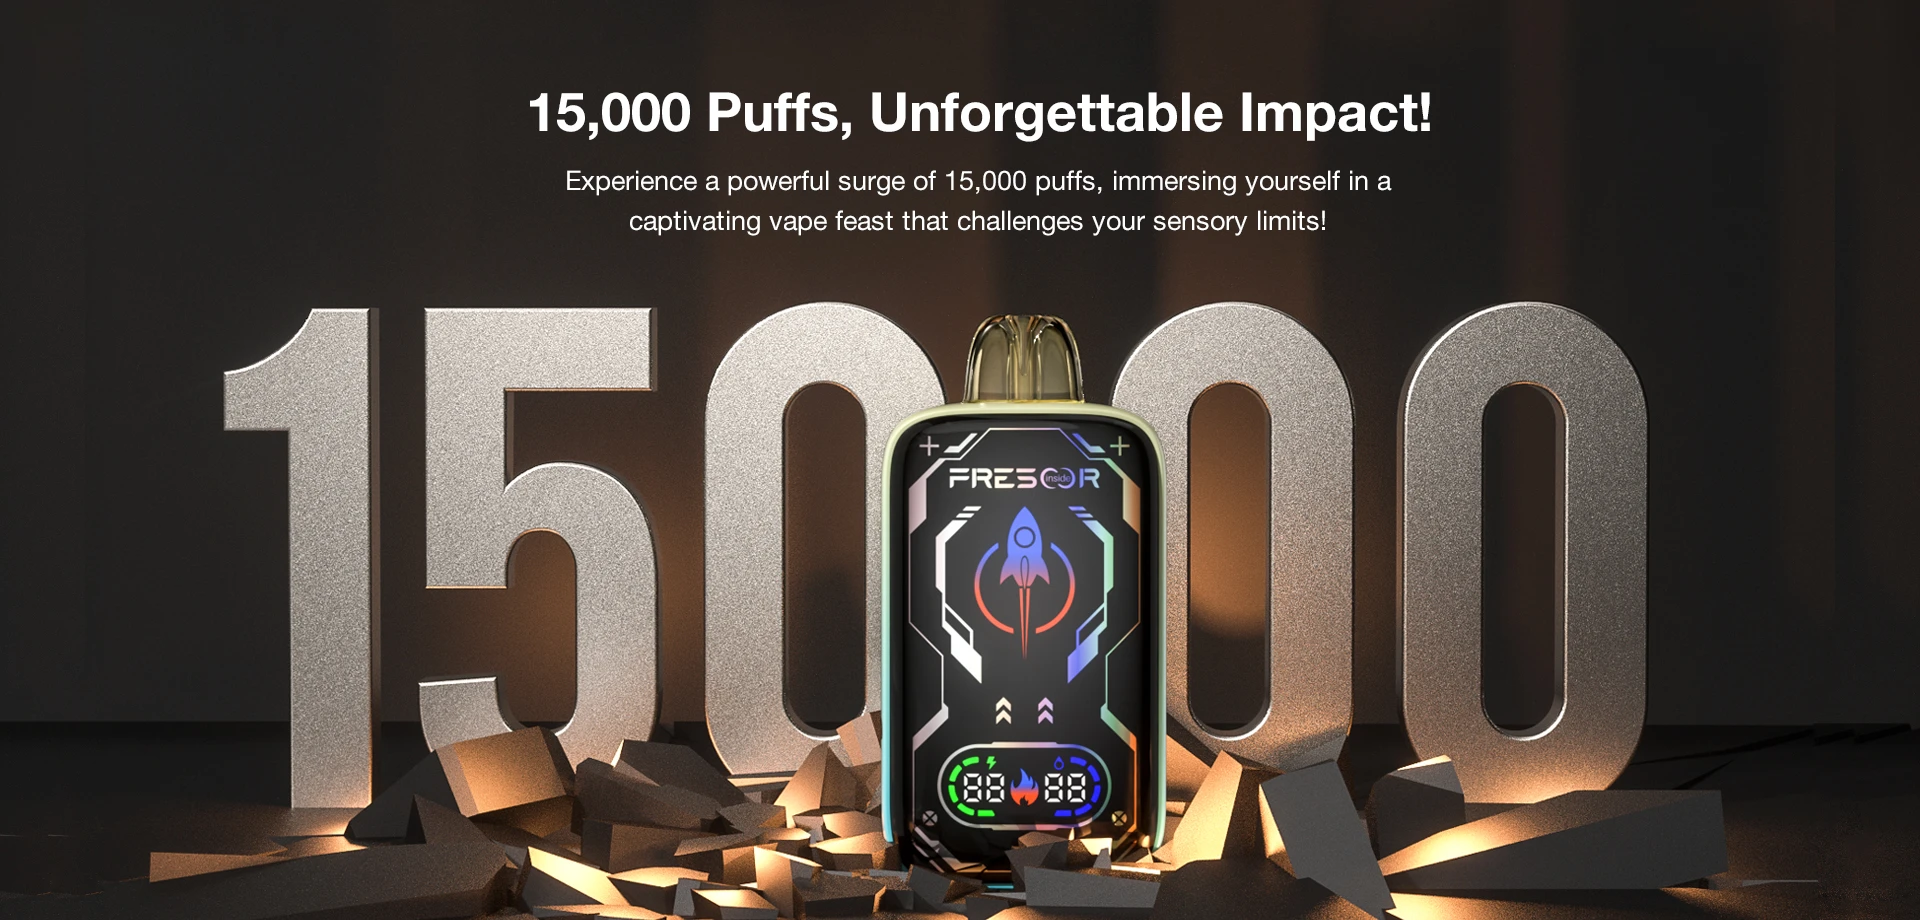 15,000 Puffs, Unforgettable Impact!  Experience a powerful surge of 15,000 puffs, immersing yourself in a captivating vape feast that challenges your sensory limits!